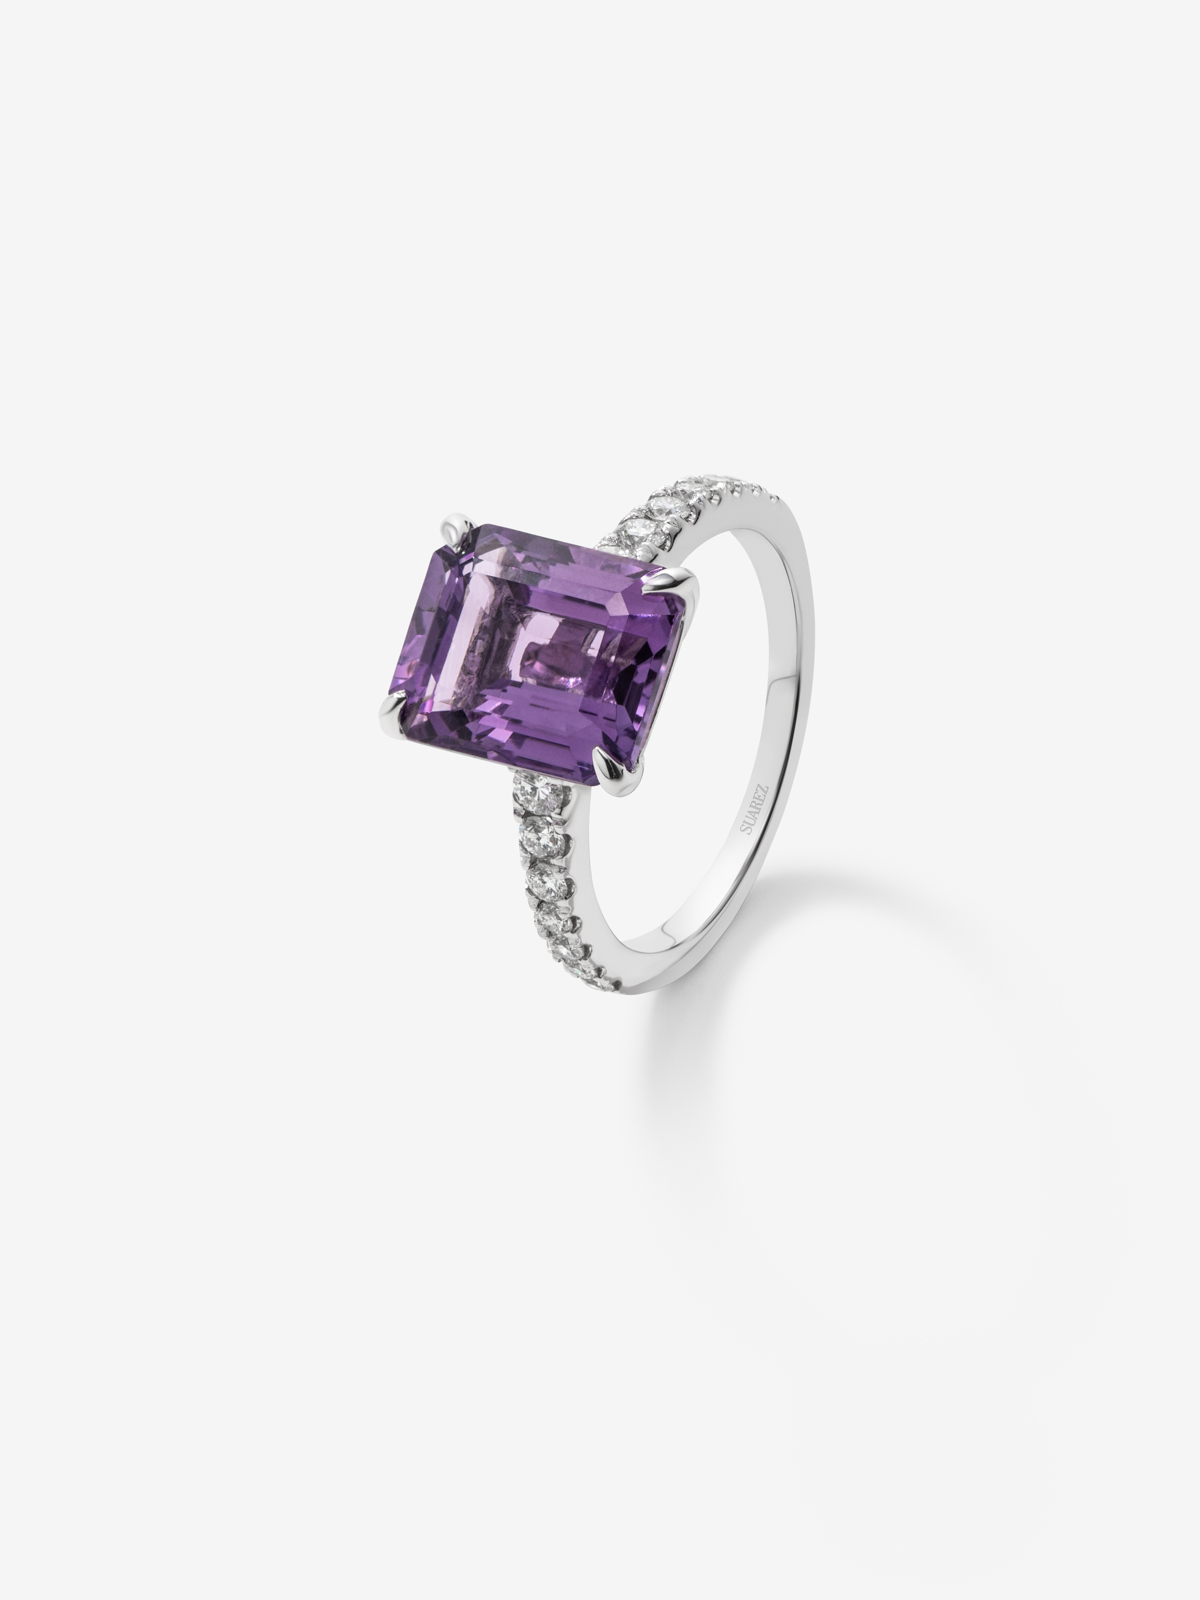 18K White Gold Ring with Purple Ameatist in Emerald Size 4.25 CTS and White Diamonds in Bright Size of 0.32 CTS